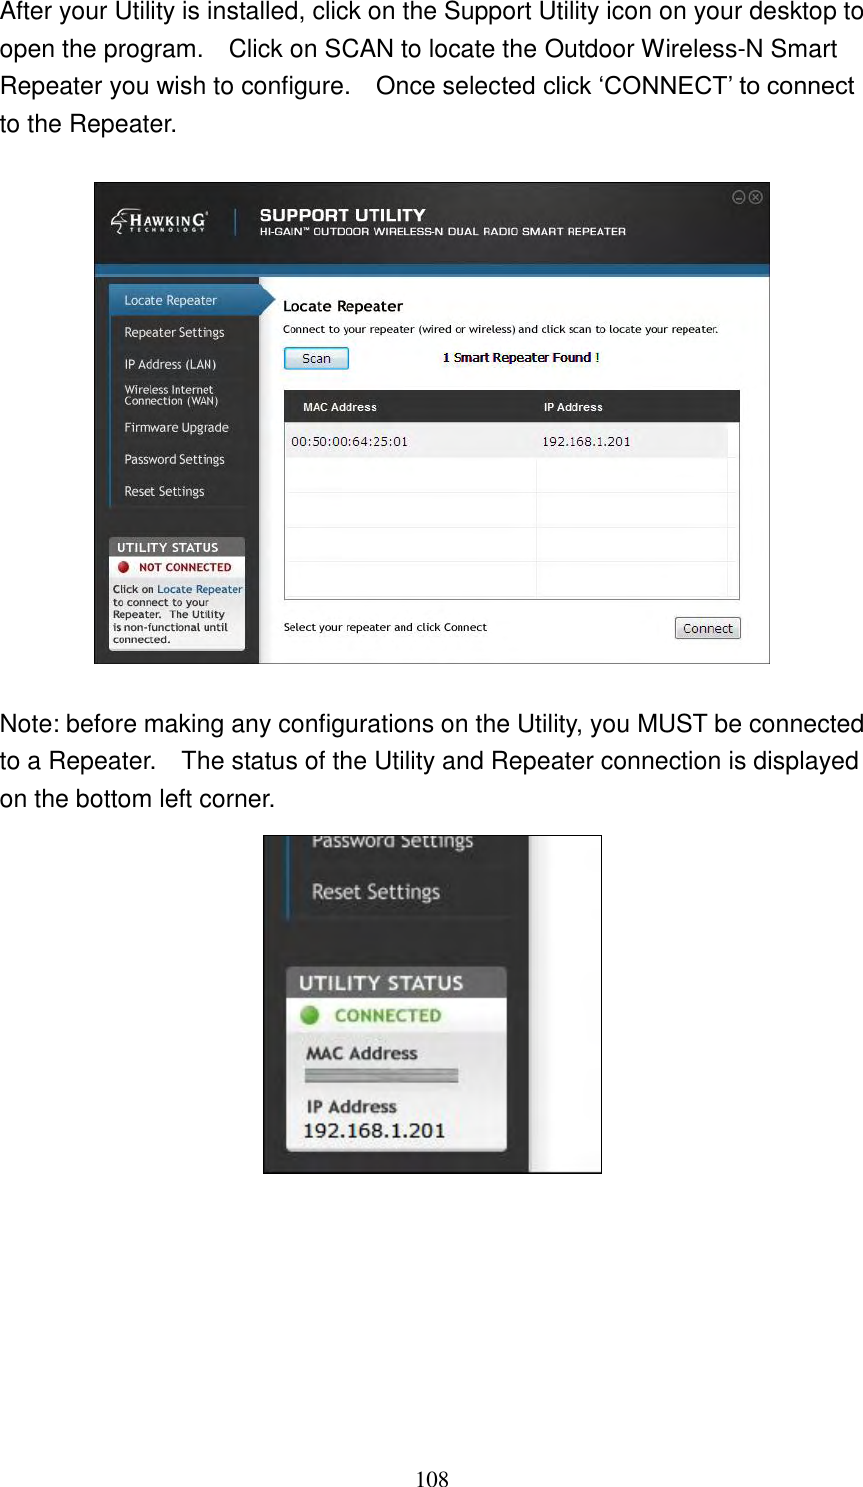 108 After your Utility is installed, click on the Support Utility icon on your desktop to open the program.    Click on SCAN to locate the Outdoor Wireless-N Smart Repeater you wish to configure.    Once selected click „CONNECT‟ to connect to the Repeater.    Note: before making any configurations on the Utility, you MUST be connected to a Repeater.    The status of the Utility and Repeater connection is displayed on the bottom left corner.            